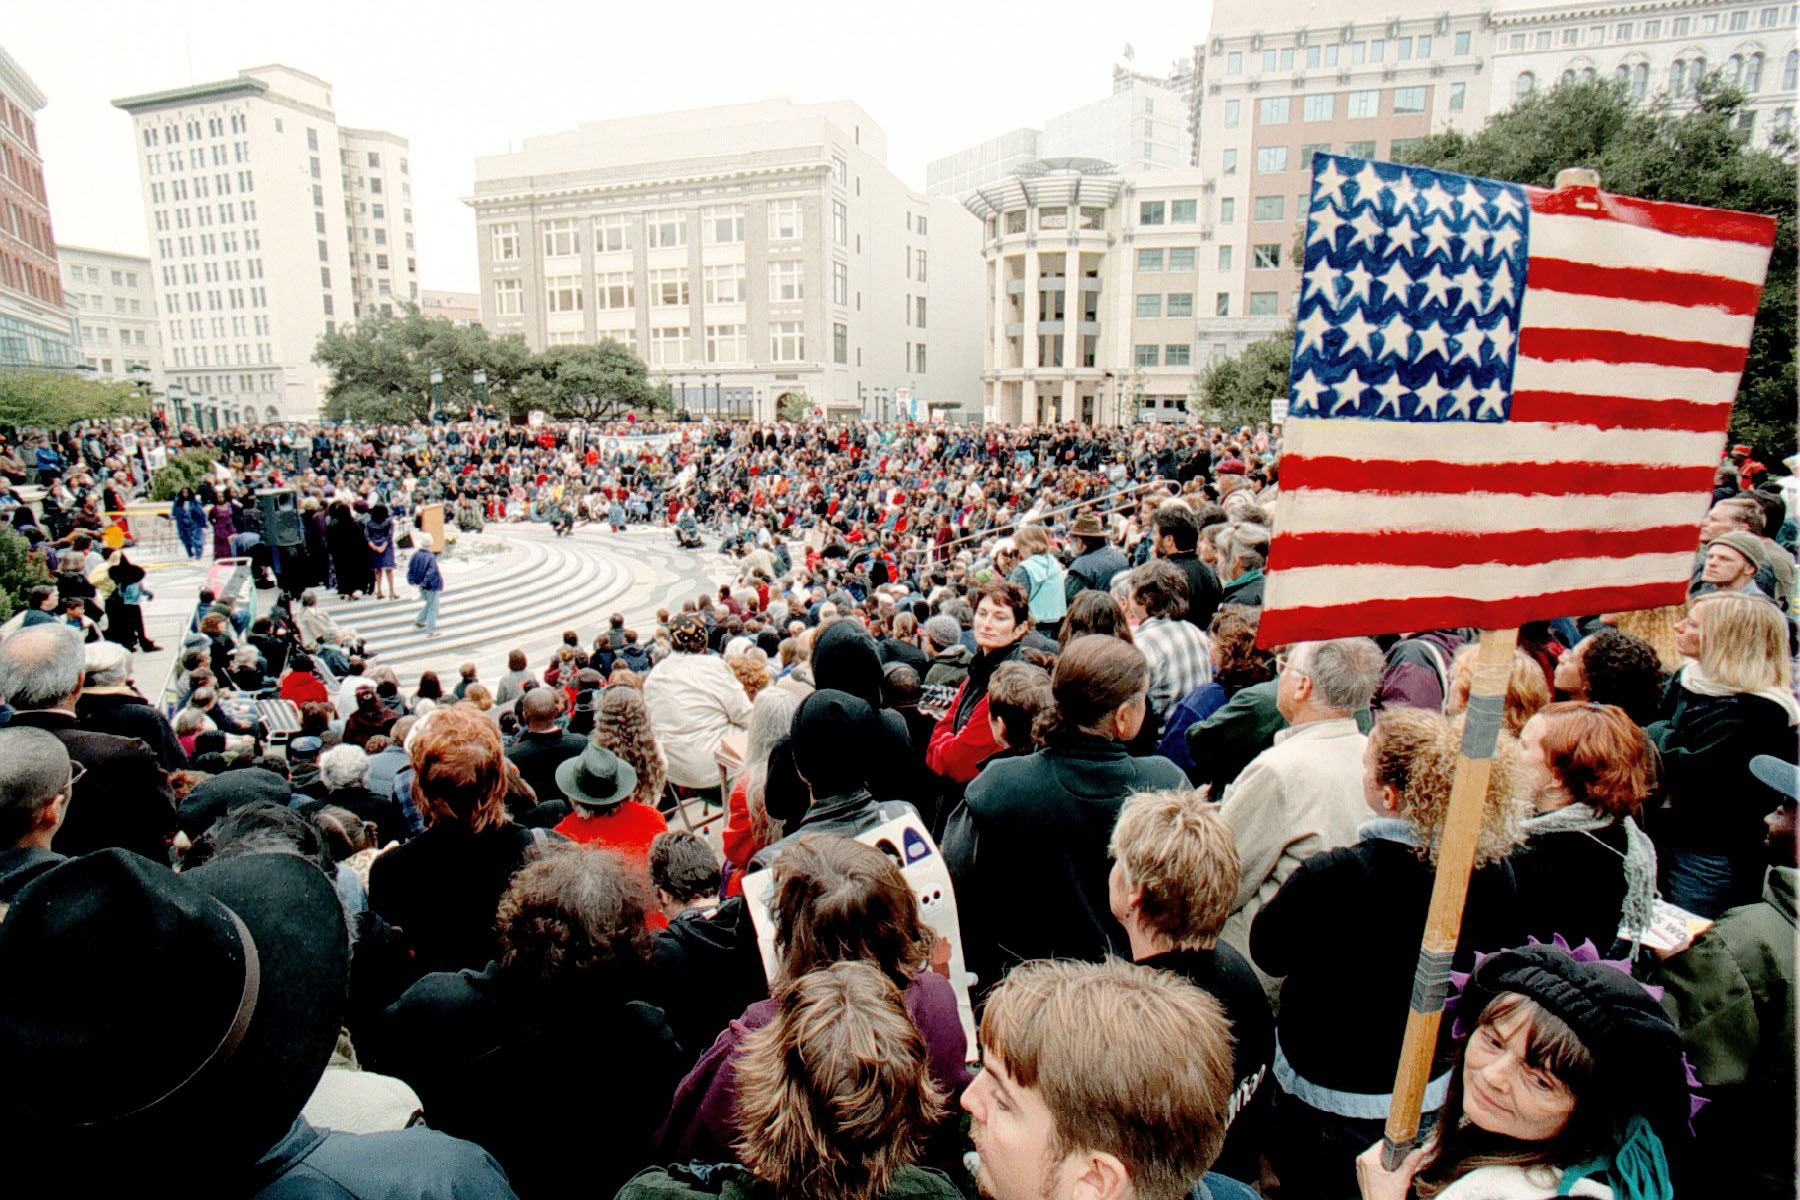 Thousands gather at Oakland's Frank H. Ogawa Plaza to thank Barbara Lee for her ‘No’ vote against using armed forces in retaliation for the September 11 terrorist attacks.